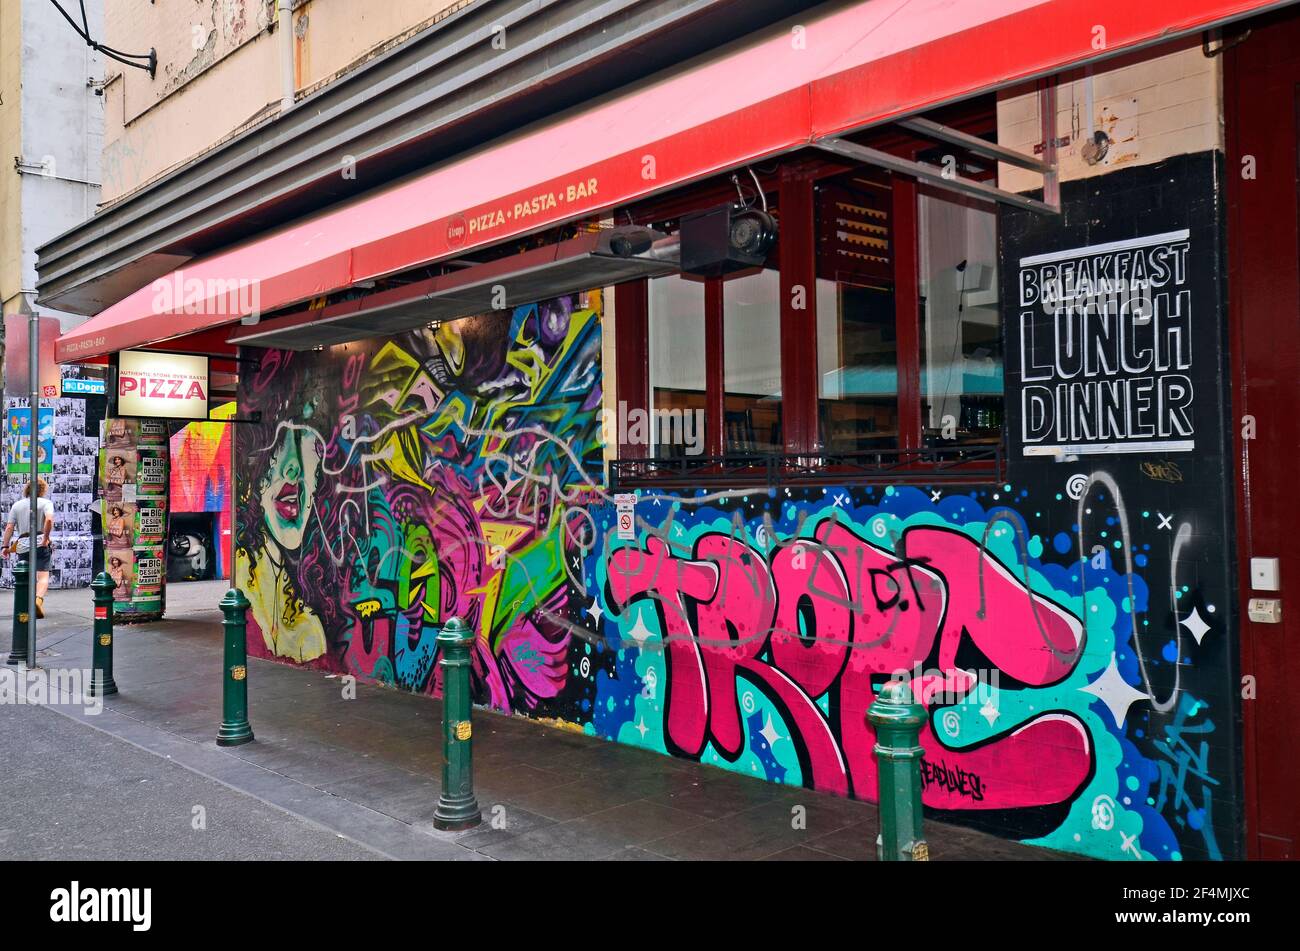 Melbourne, VIC, Australia - November 05, 2017: Restaurant in Hosier Lane - public urban street art gallery covered with ever-changing graffiti in the Stock Photo